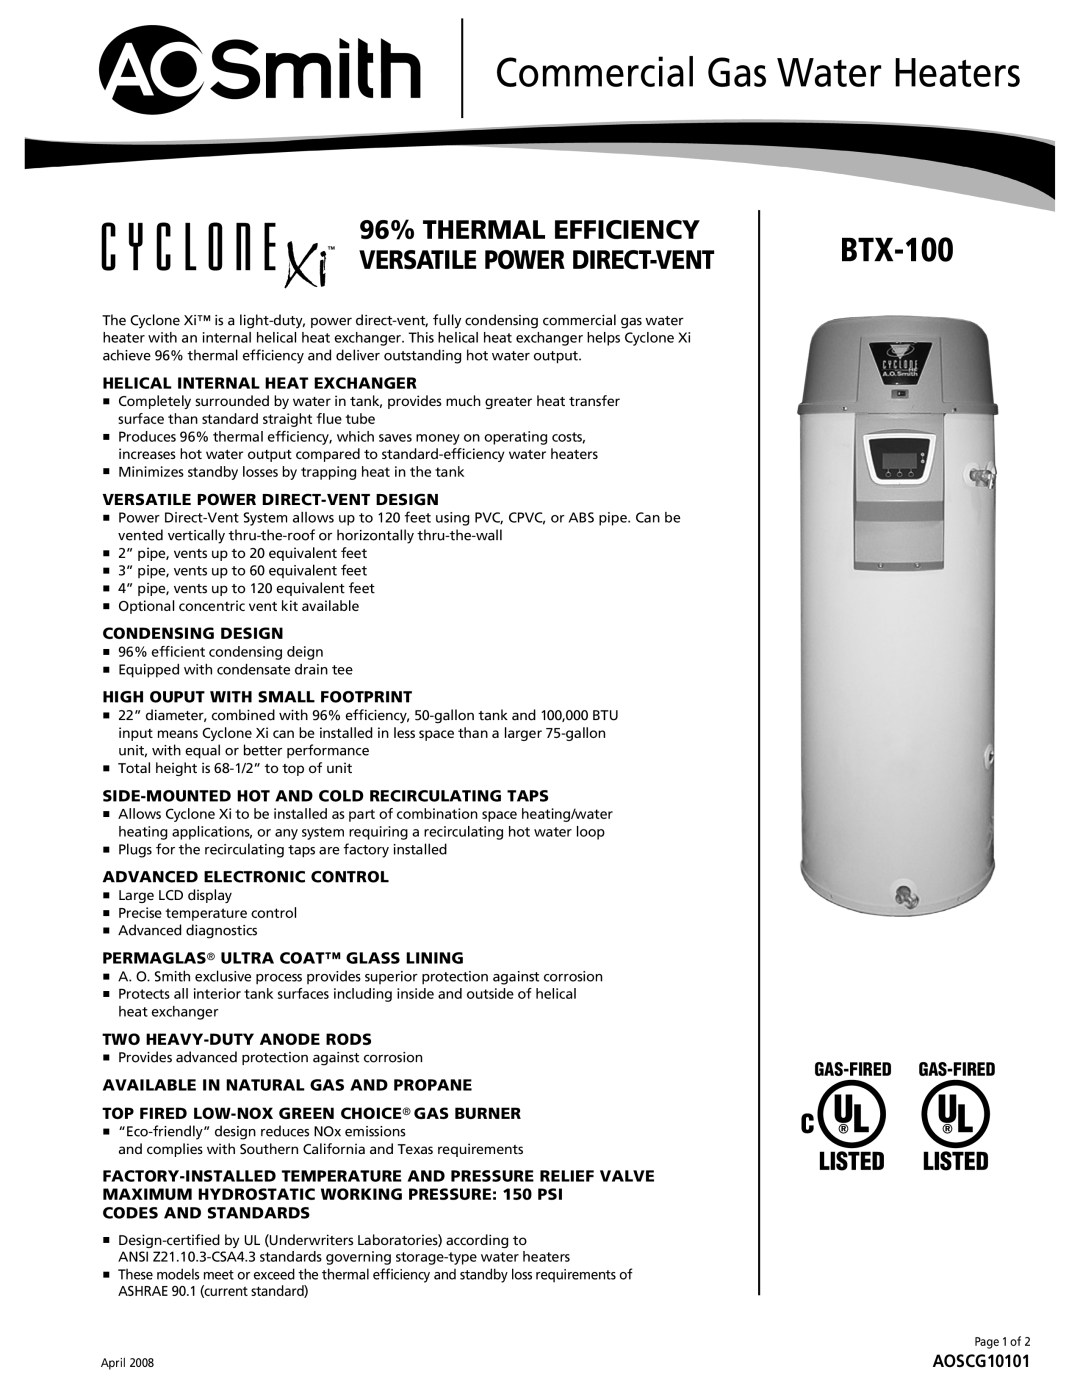 A.O. Smith BTX-100 manual Commercial Gas Water Heaters, 96% THERMAL EFFICIENCY VERSATILE POWER DIRECT-VENT 